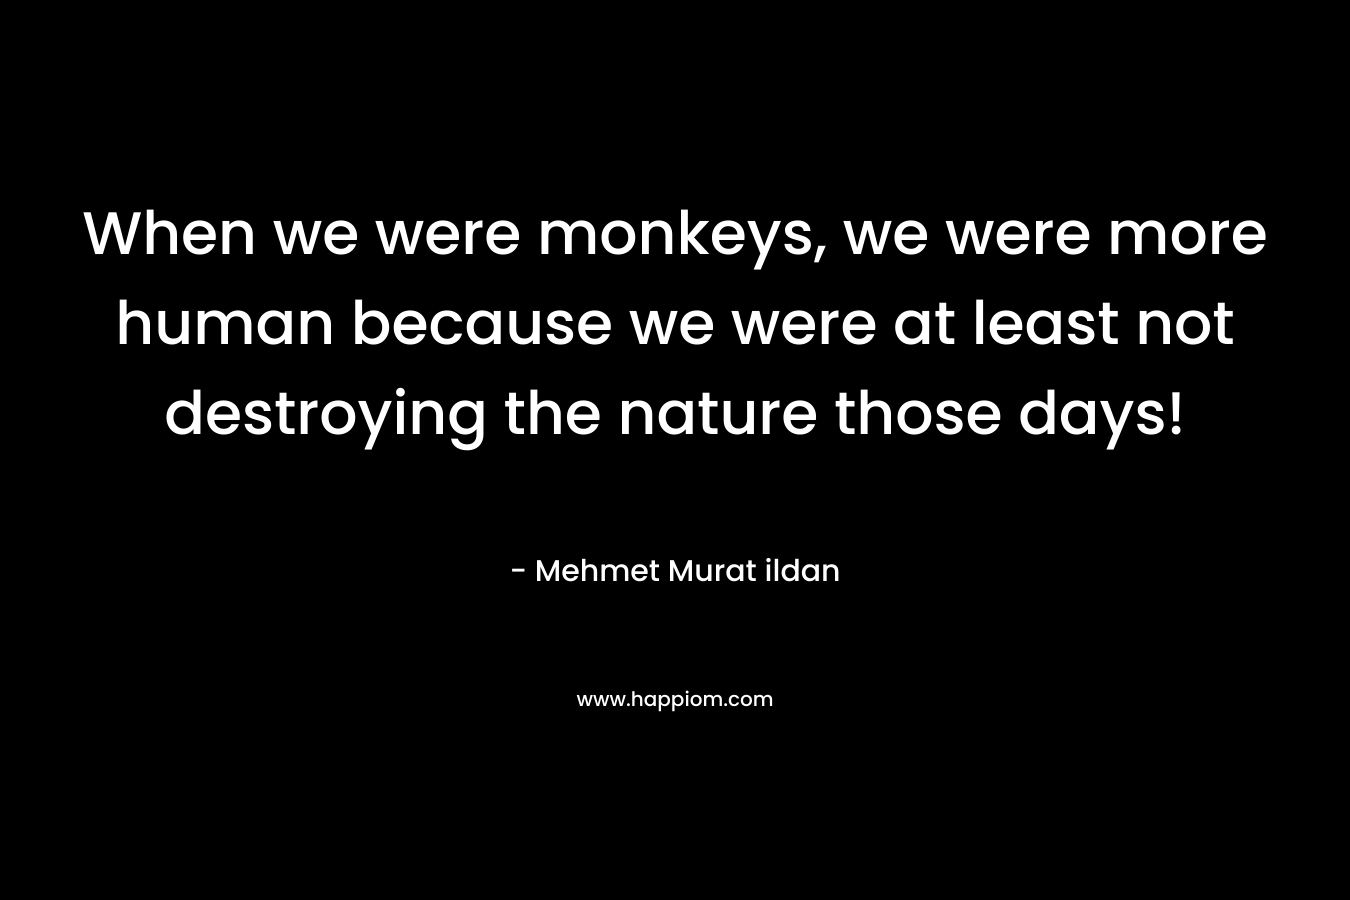 When we were monkeys, we were more human because we were at least not destroying the nature those days!